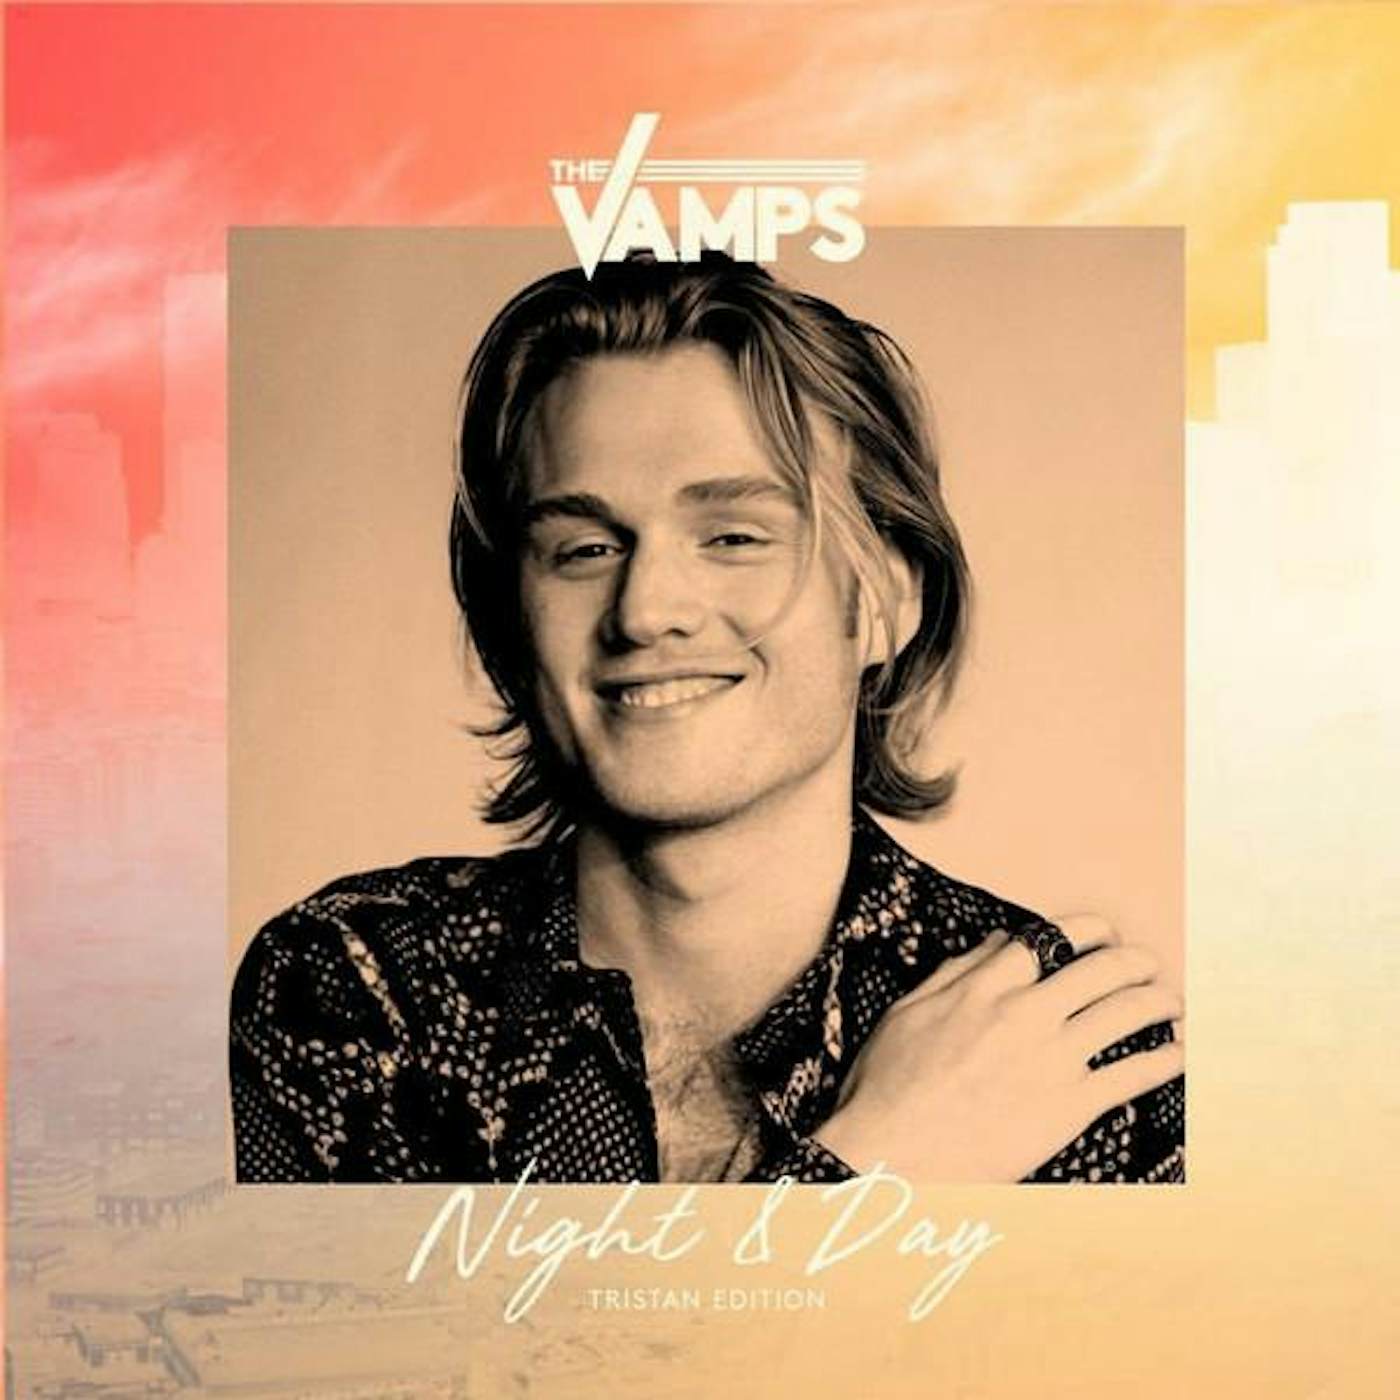 The Vamps NIGHT & DAY (TRISTAN DAY EDITION) CD